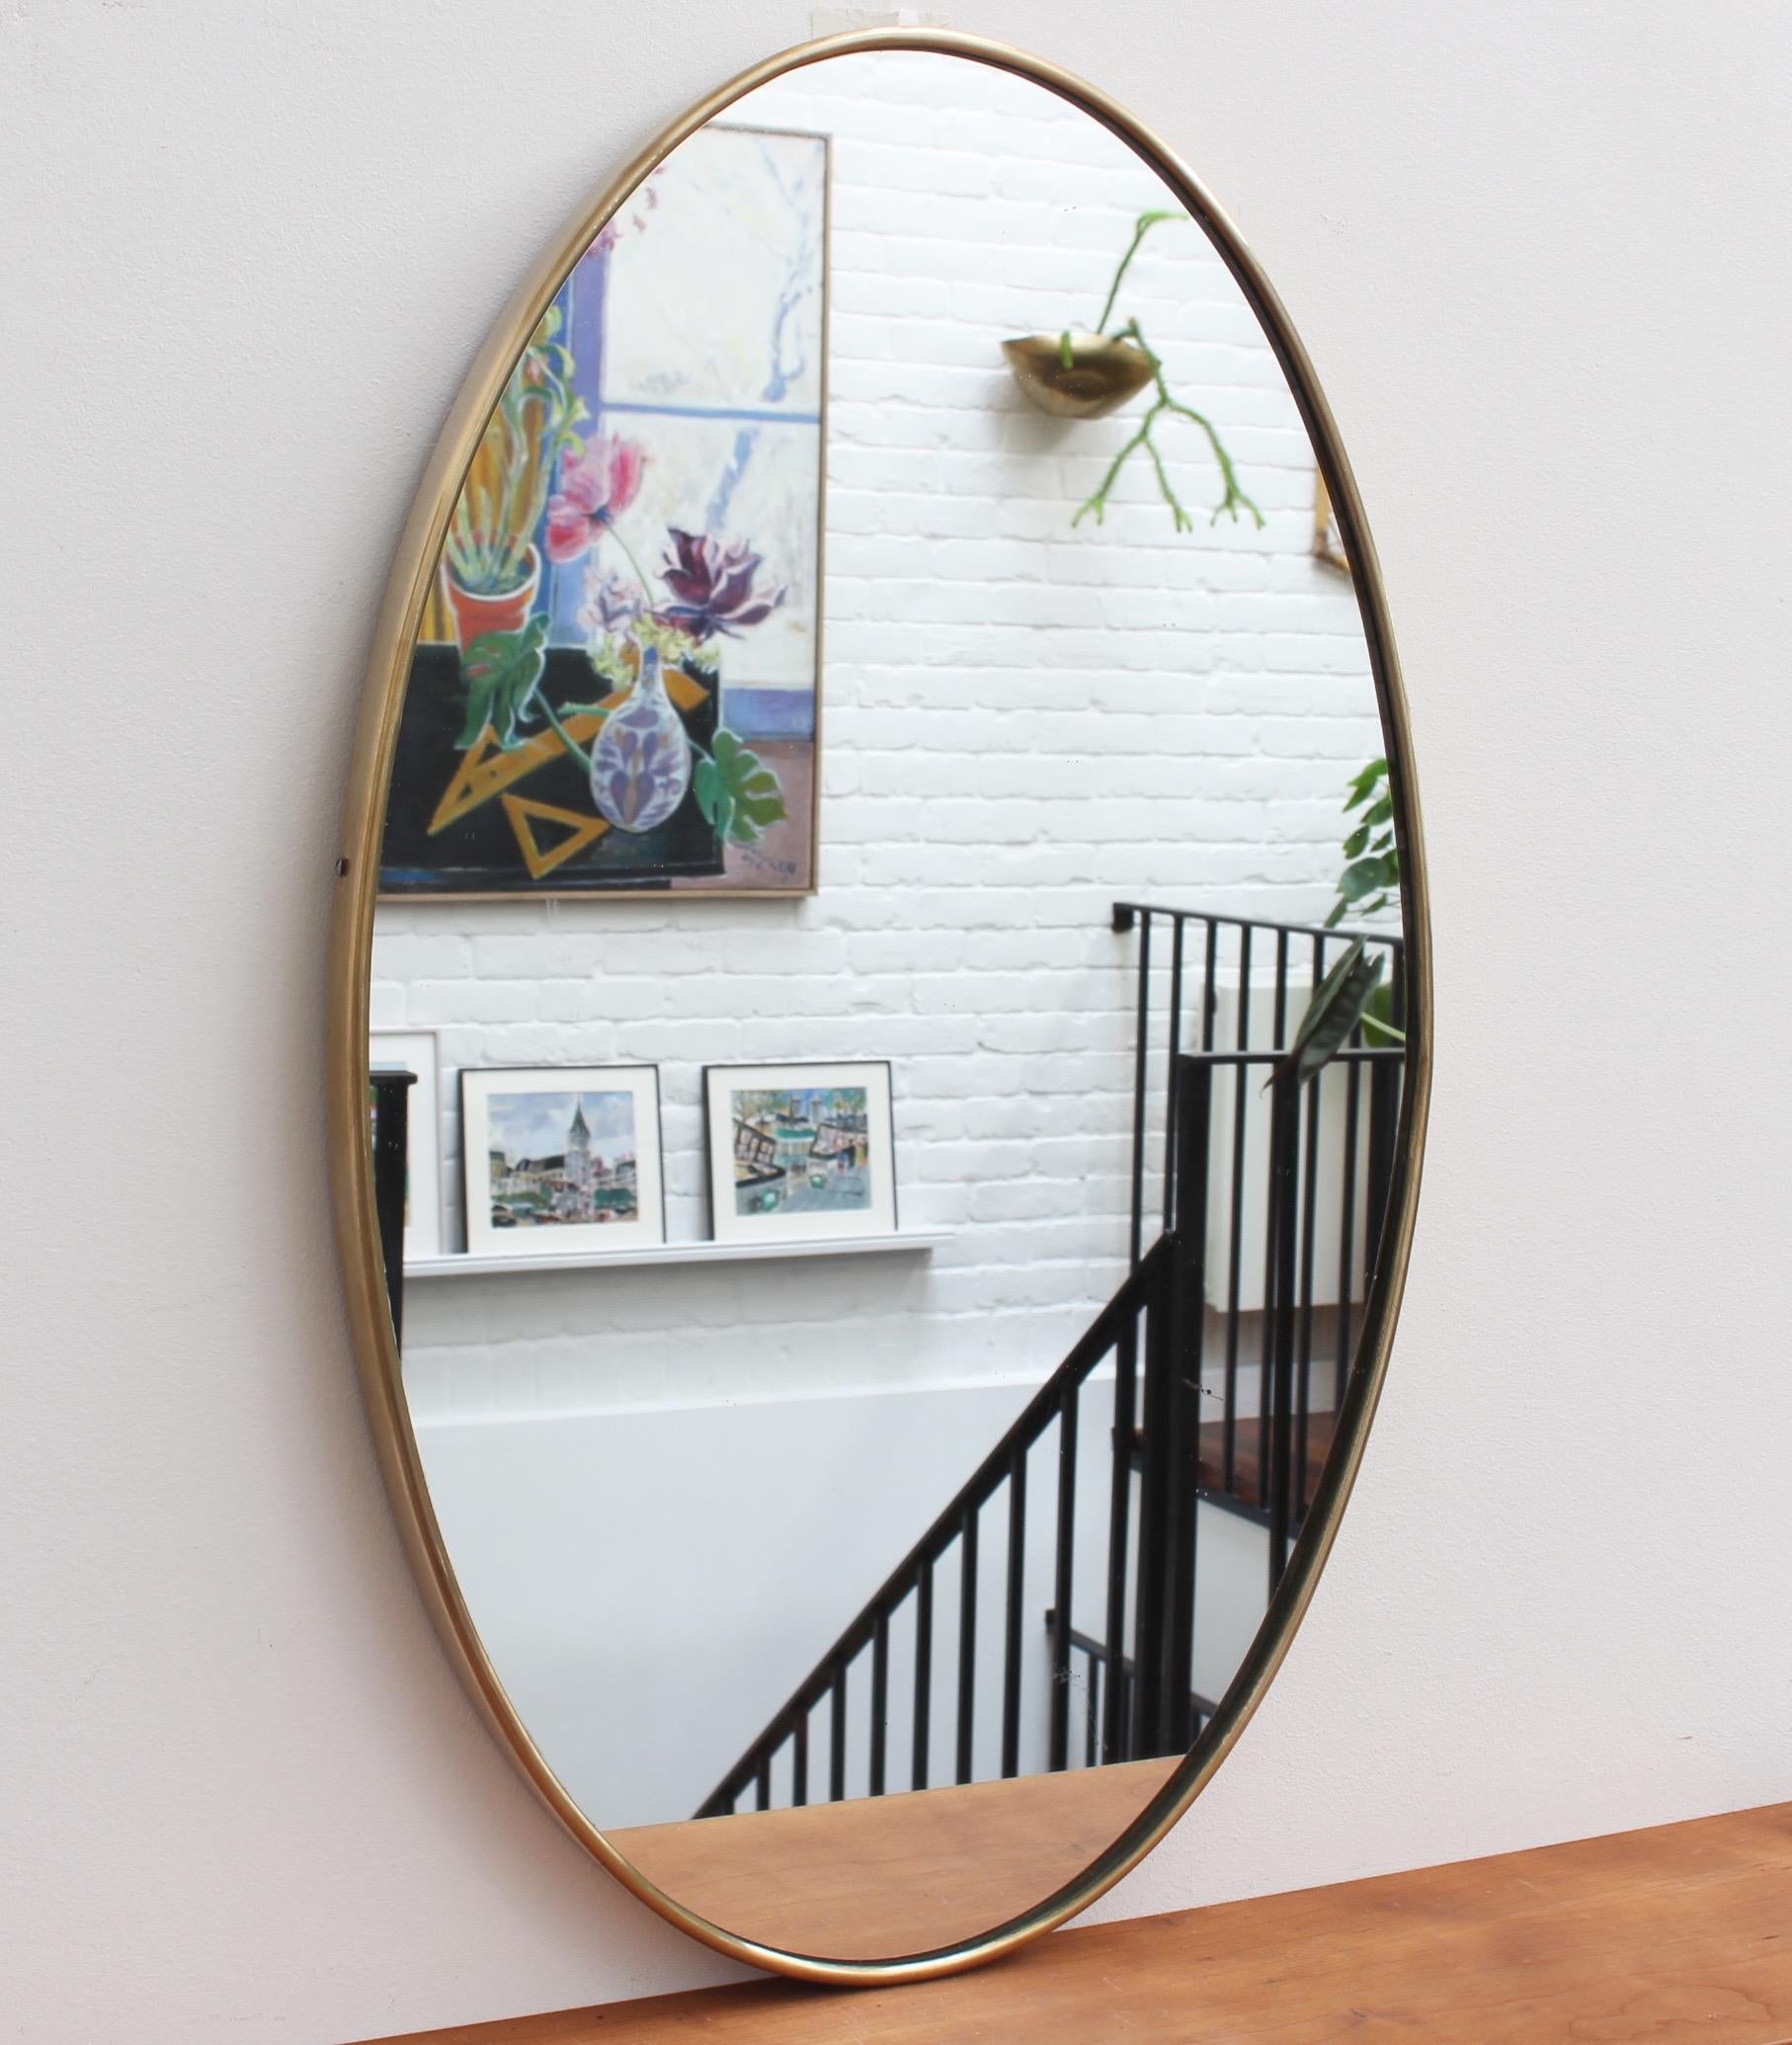 Midcentury Italian wall mirror with brass frame (circa 1950s). The mirror is sensuously oval-shaped and both classically elegant and distinctive in a modern Gio Ponti style. The piece is in good vintage condition with some evident but characterful